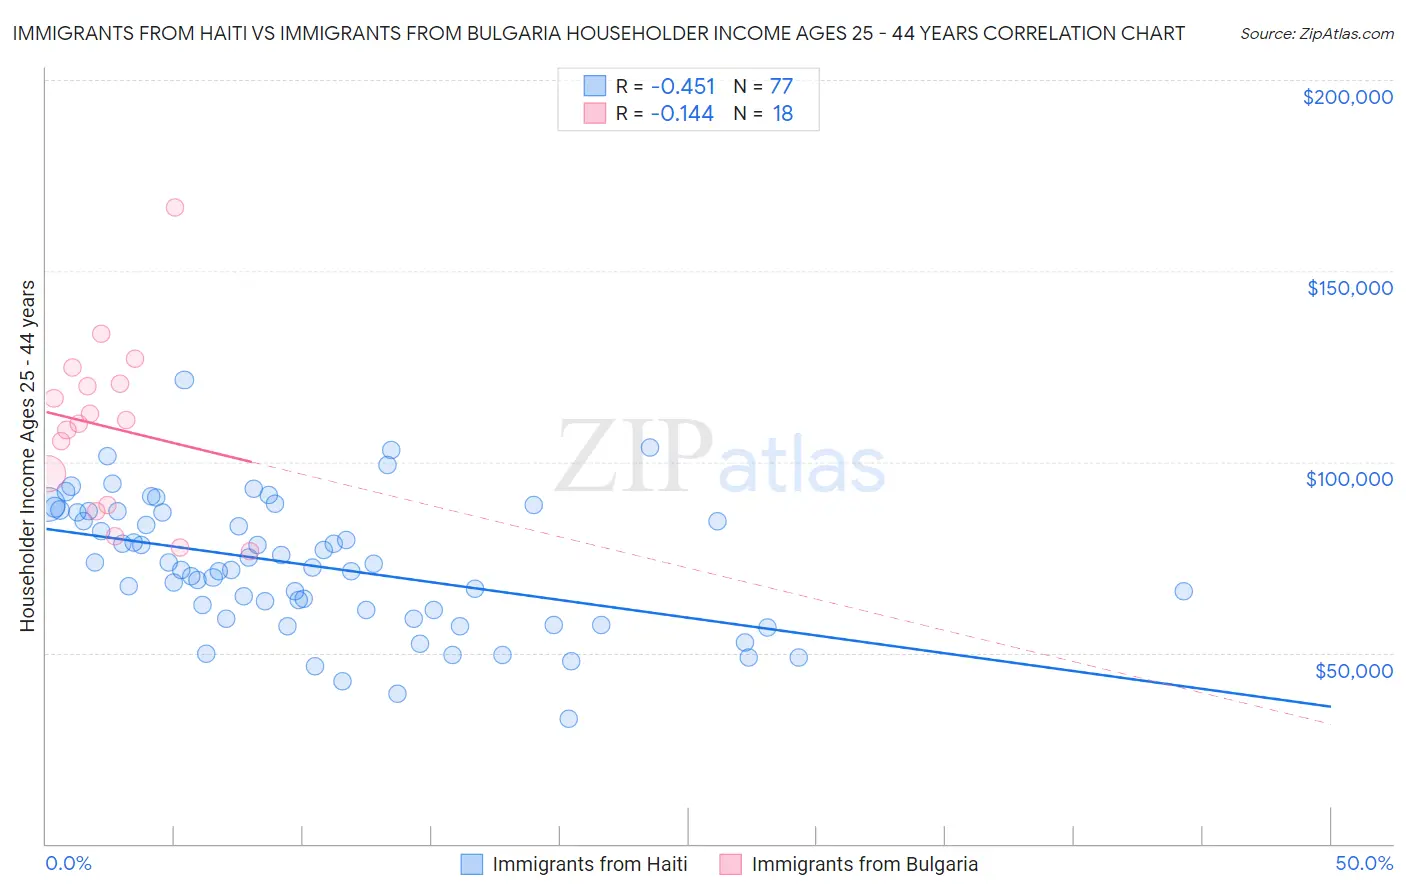 Immigrants from Haiti vs Immigrants from Bulgaria Householder Income Ages 25 - 44 years